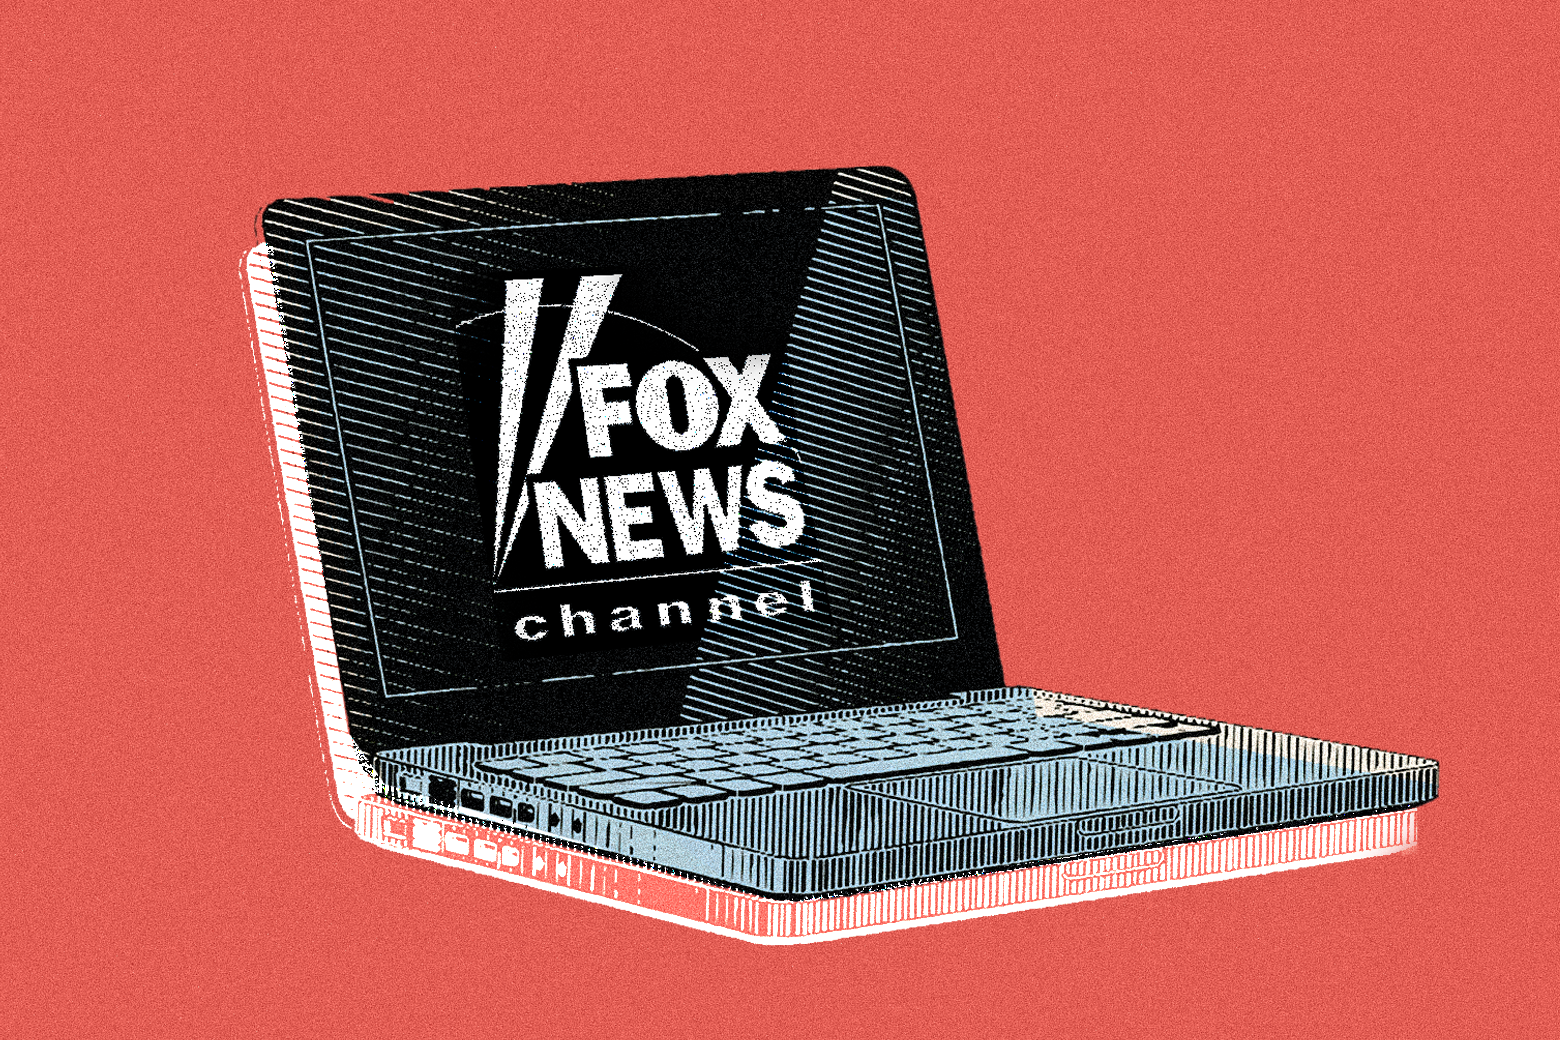 Illustration of a laptop with a Fox News logo on screen.